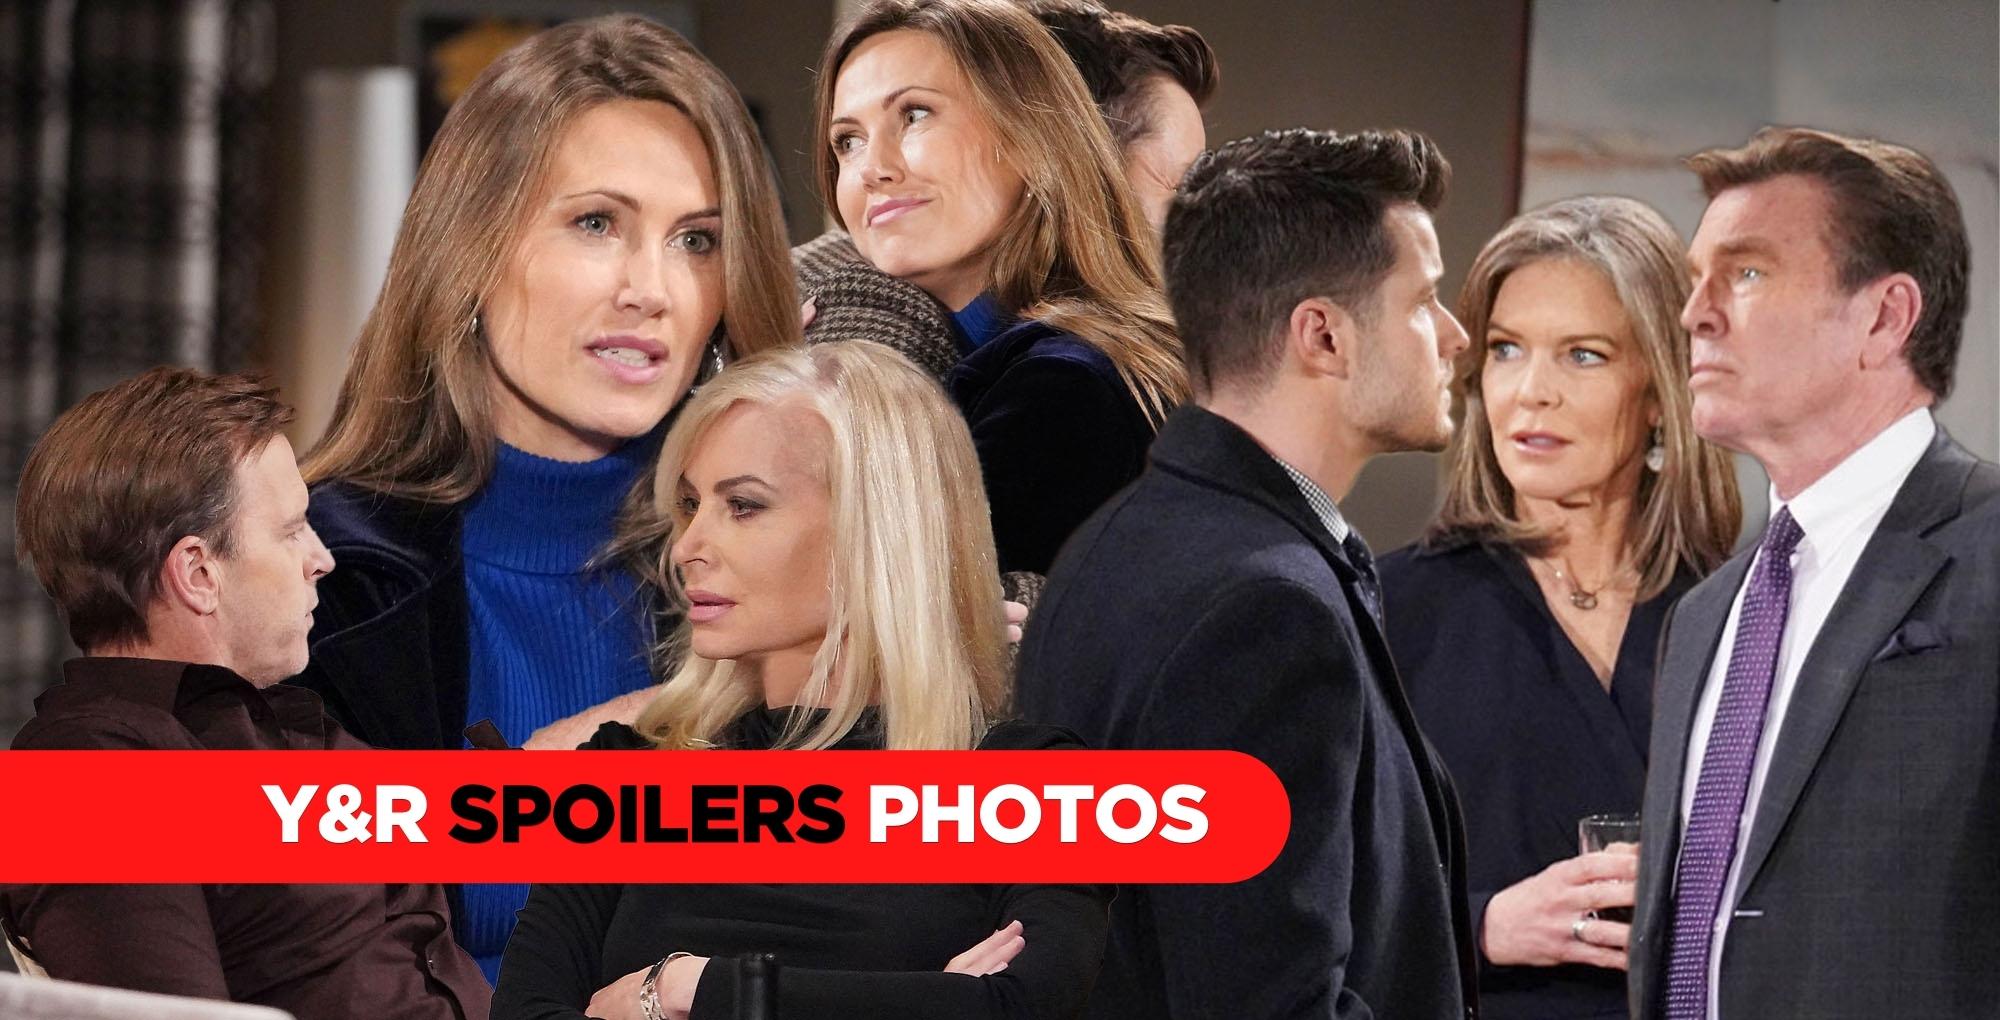 y&r spoilers photos for february 15, 2023